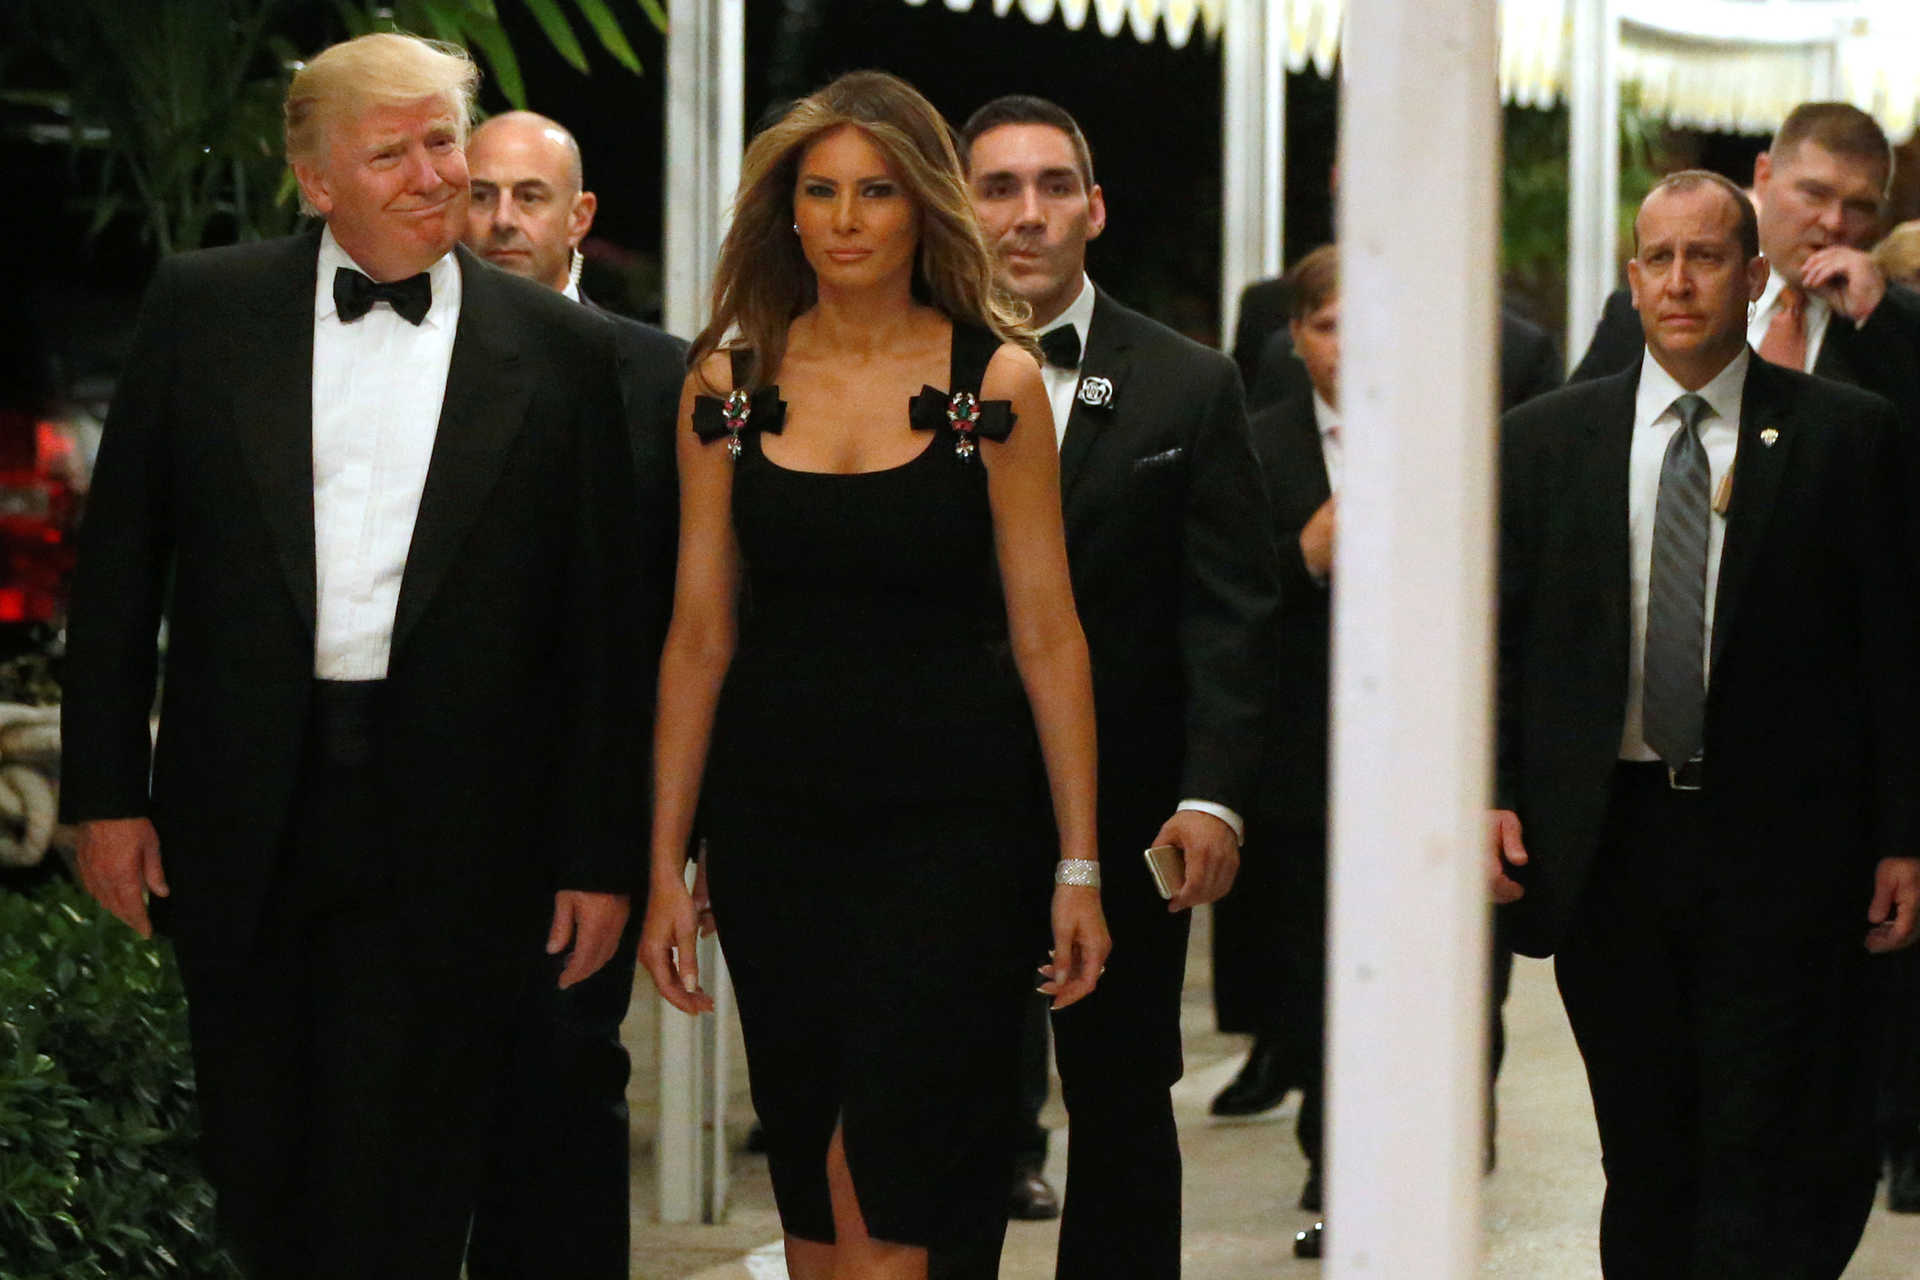 U.S. President-elect Donald Trump and his wife Melania Trump arrive for a New Year’s Eve celebration with members and guests at the Mar-a-lago Club in Palm Beach